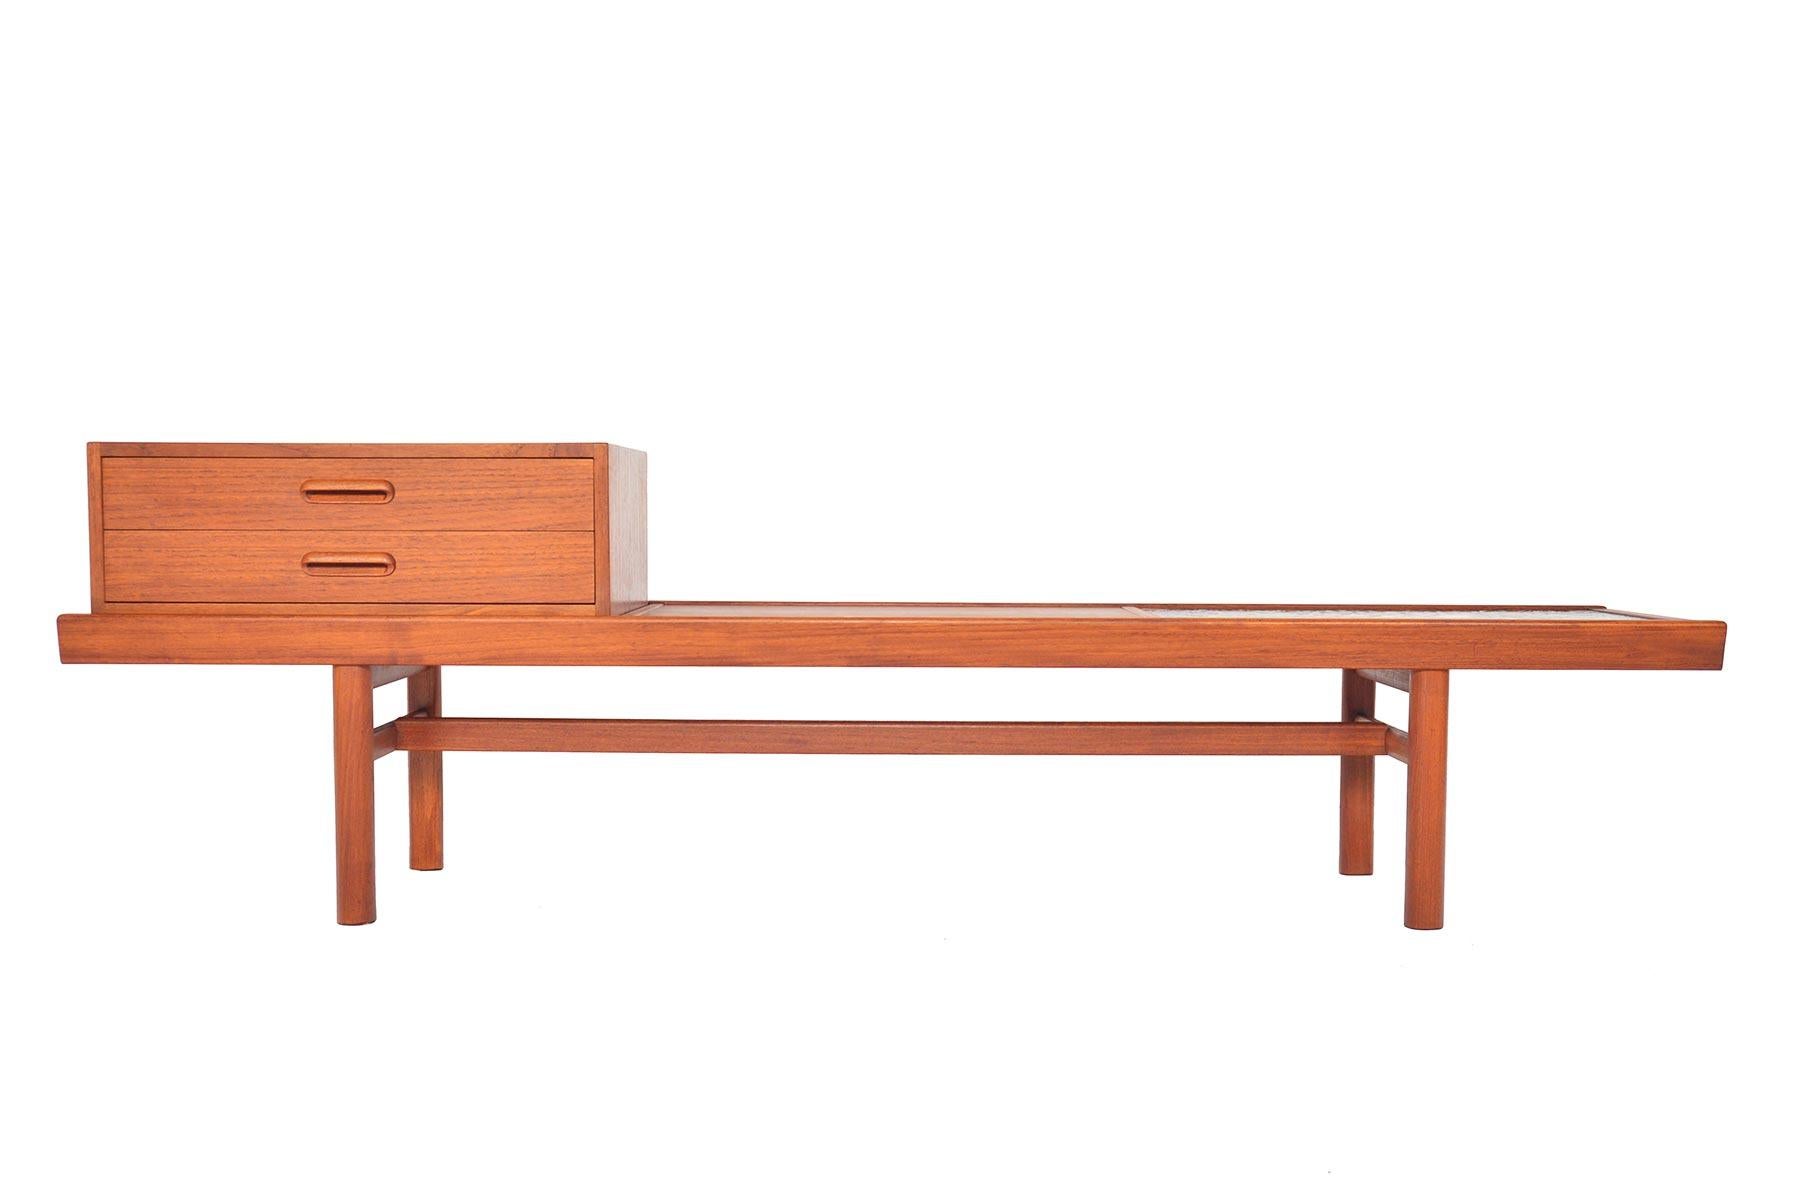 Wonderfully dynamic, this modular teak bench was manufactured by Sola Møbelfabrikken as Model Multiflex Nr. 160. A large teak frame holds three units- a case with two drawers, a teak seat bench, and a resin and stone plate. Pieces can be moved